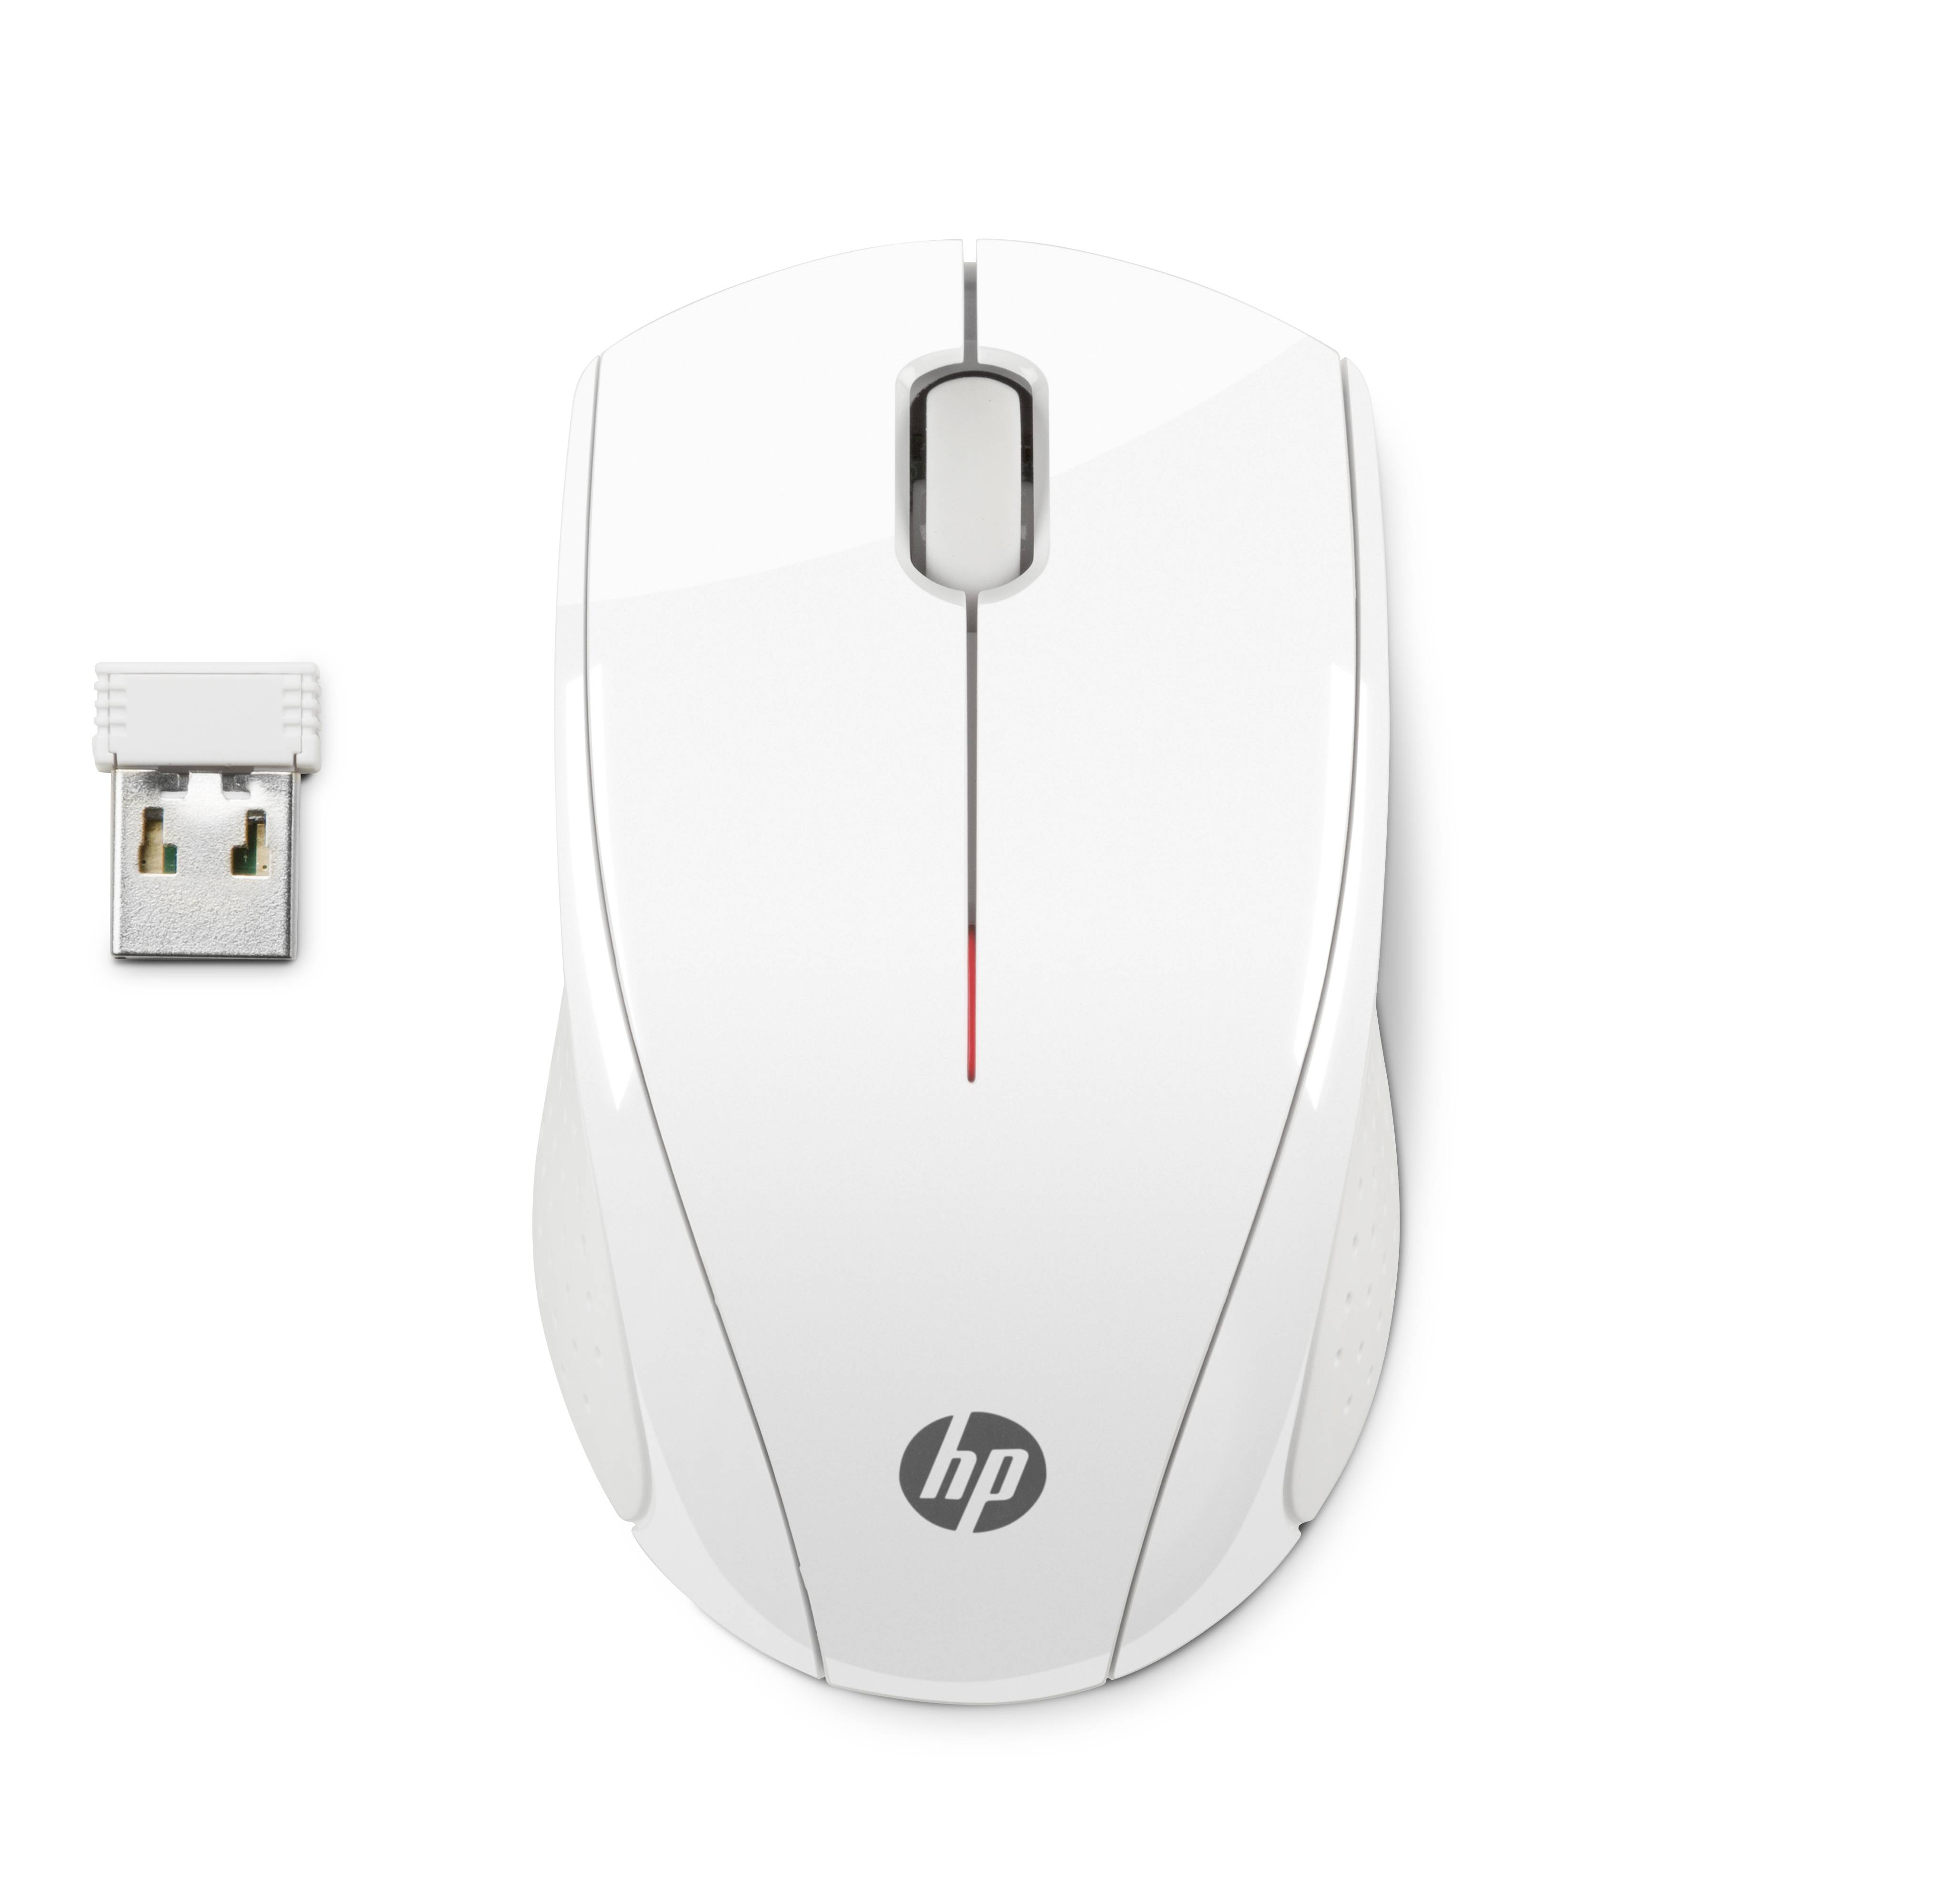 hp wireless mouse x3000 loses connection